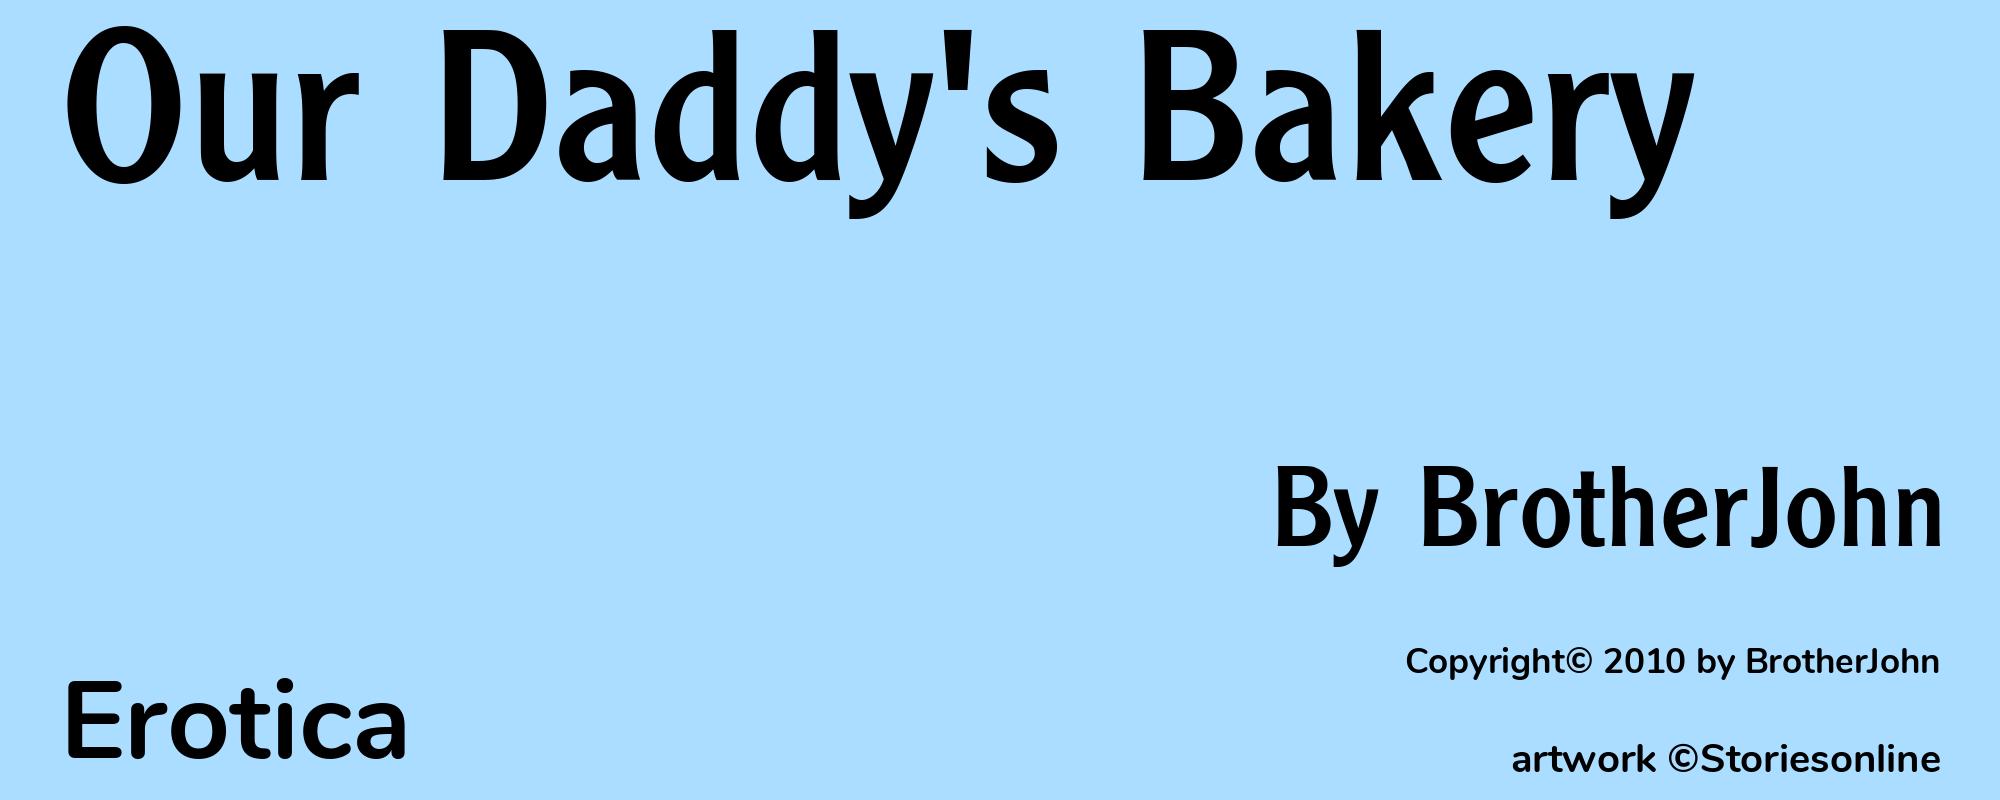 Our Daddy's Bakery - Cover